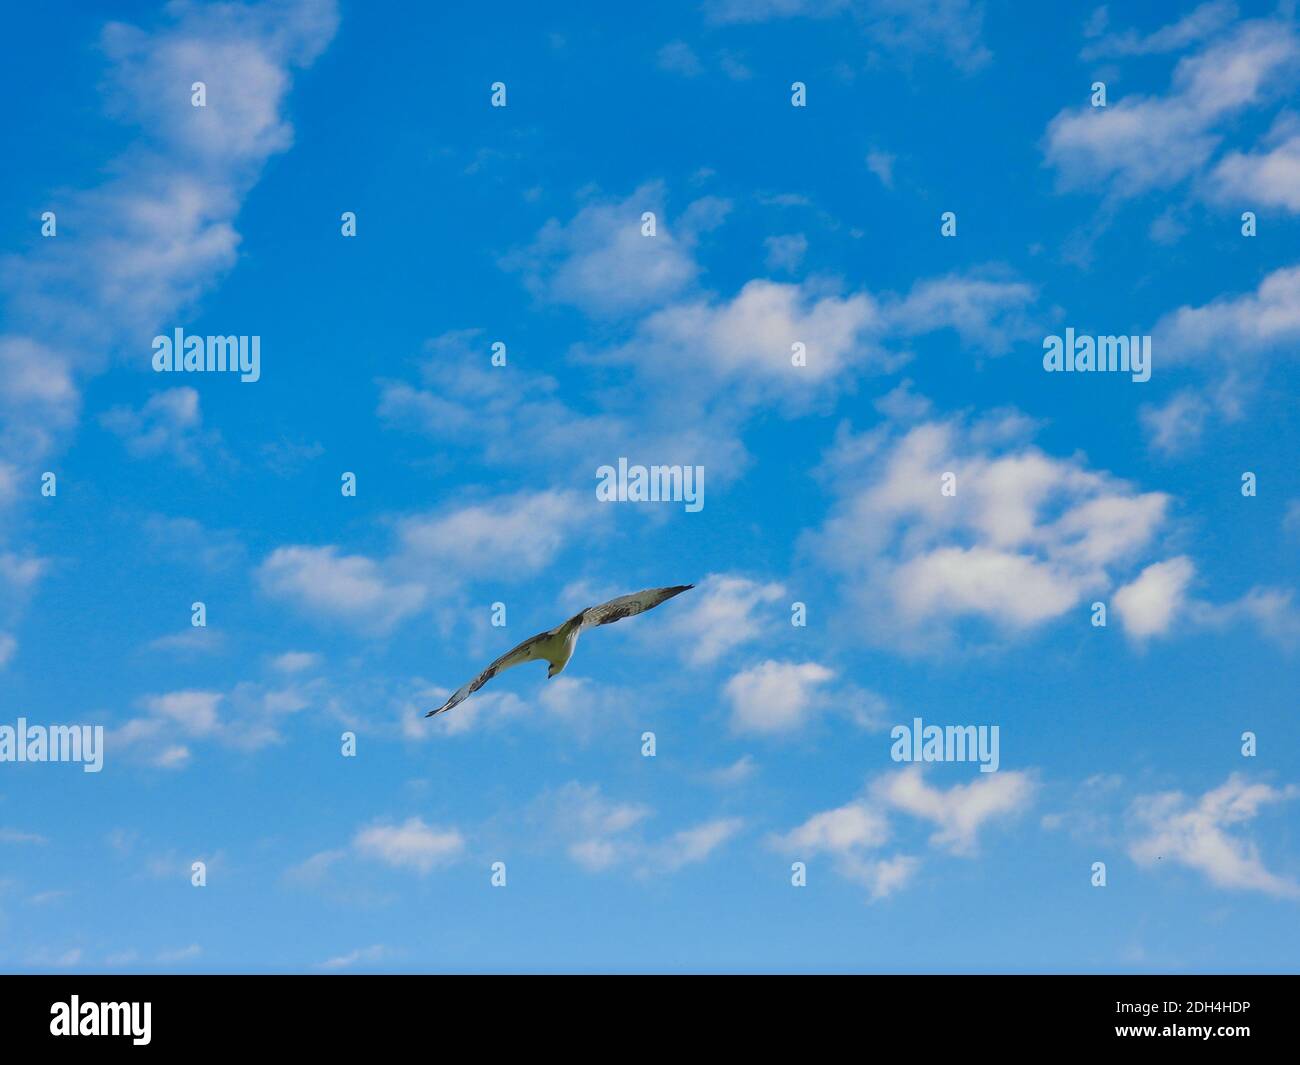 Osprey Soaring Through the Bright Blue Sky with Fluffy White Clouds Bird of Prey Hunting on a Beautiful Summer Day Stock Photo